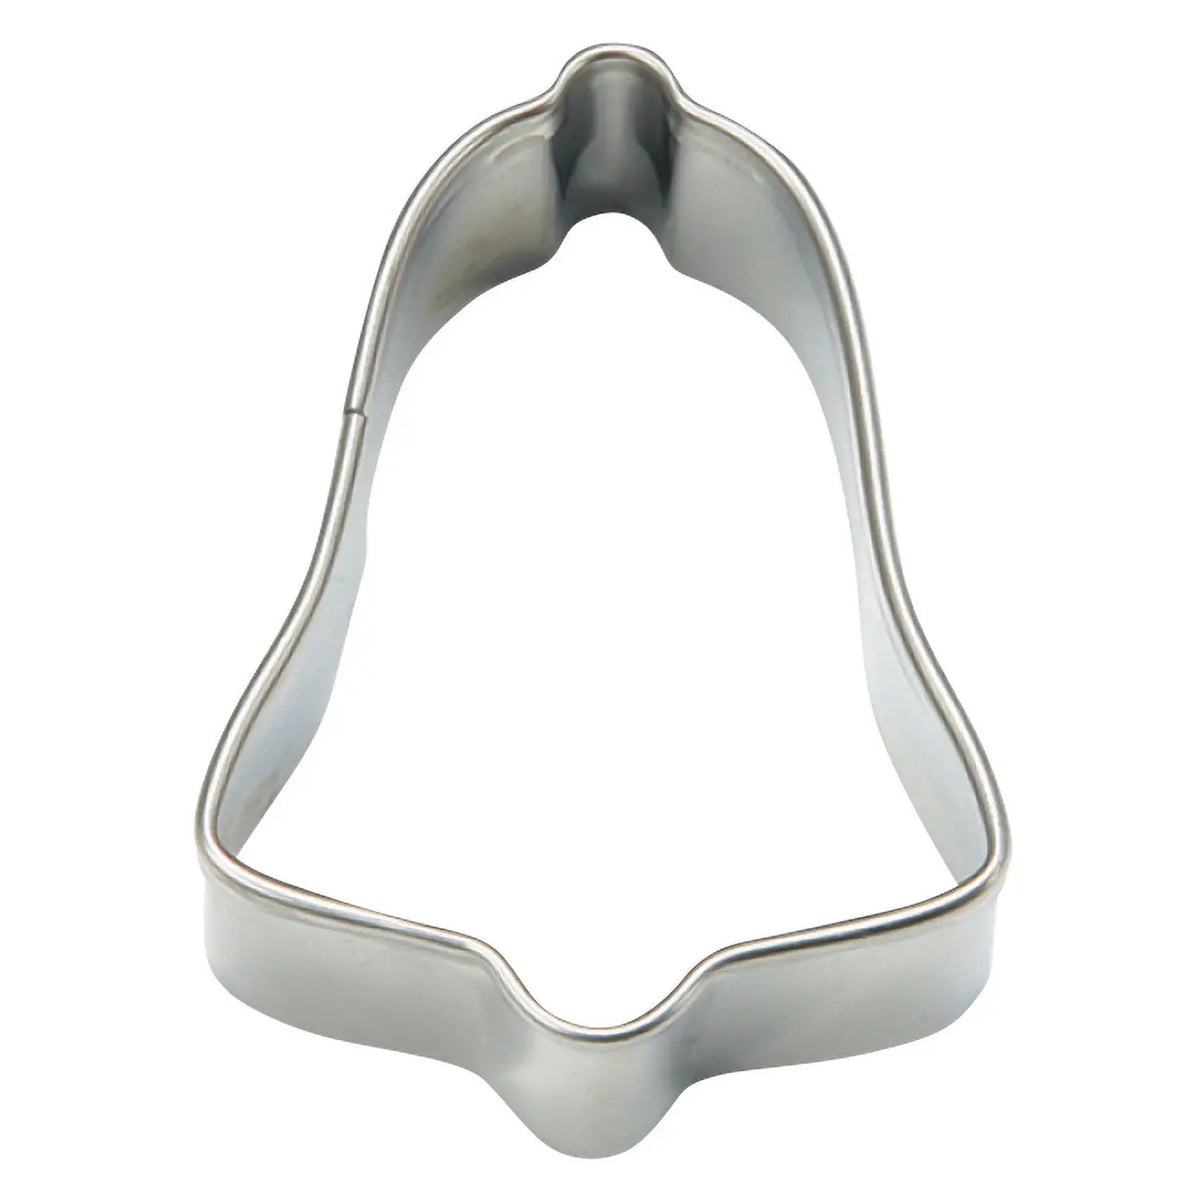 TIGERCROWN Cake Land Stainless Steel Cookie Cutter Bell